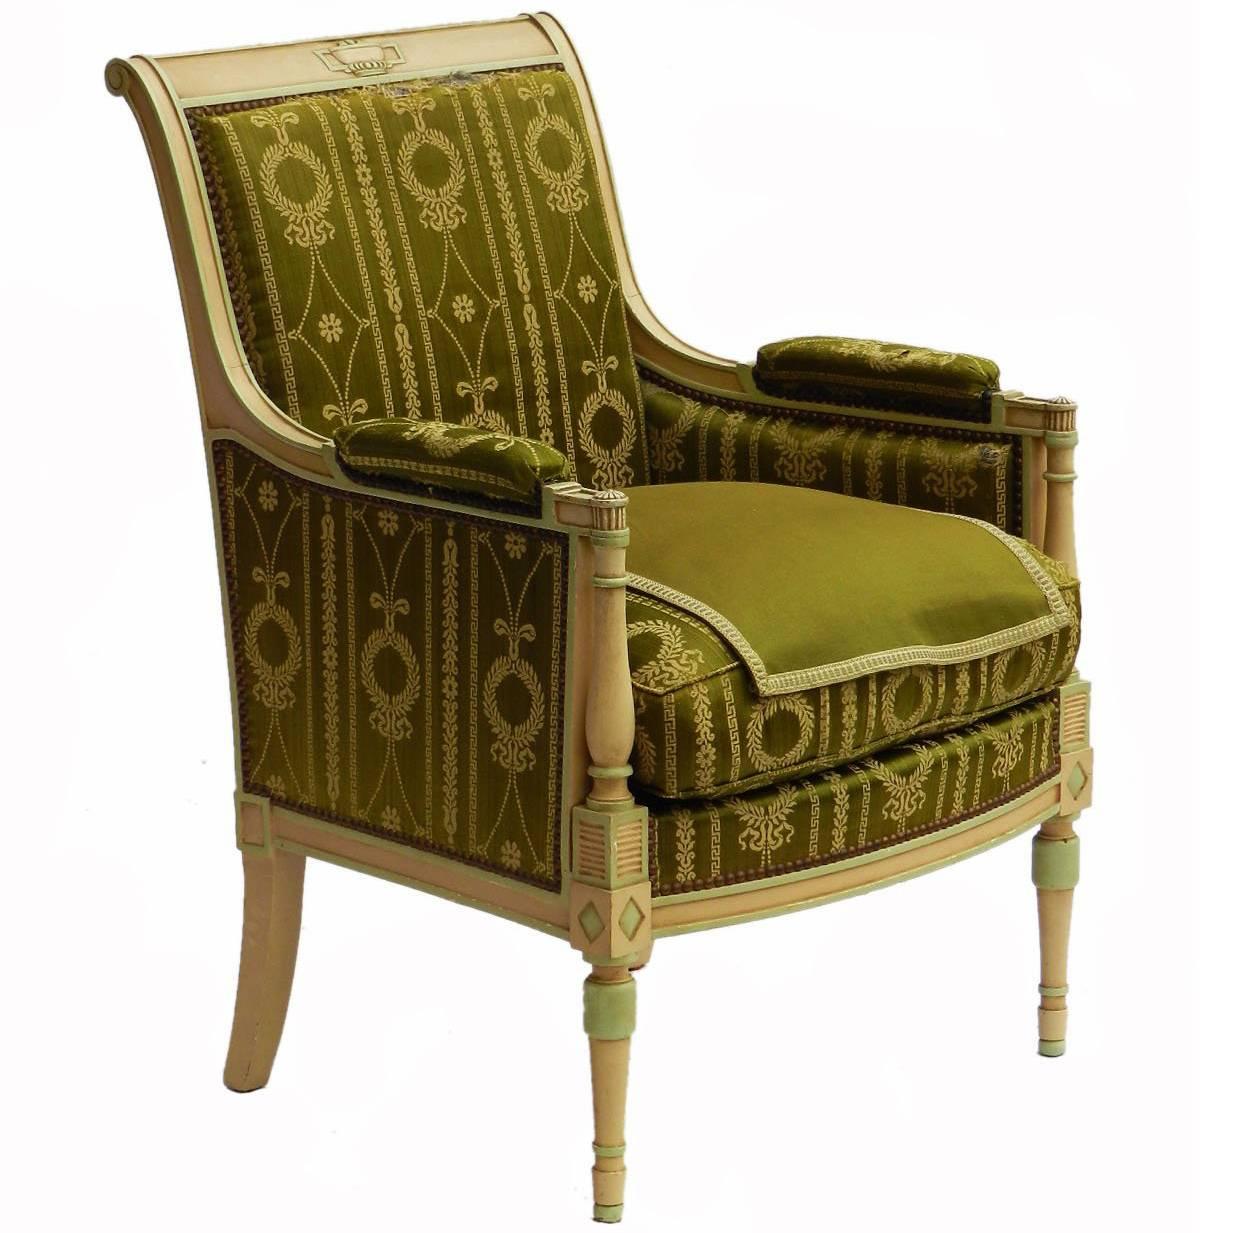 Empire revival Bergere Armchair includes recovering Original Early 20th Century